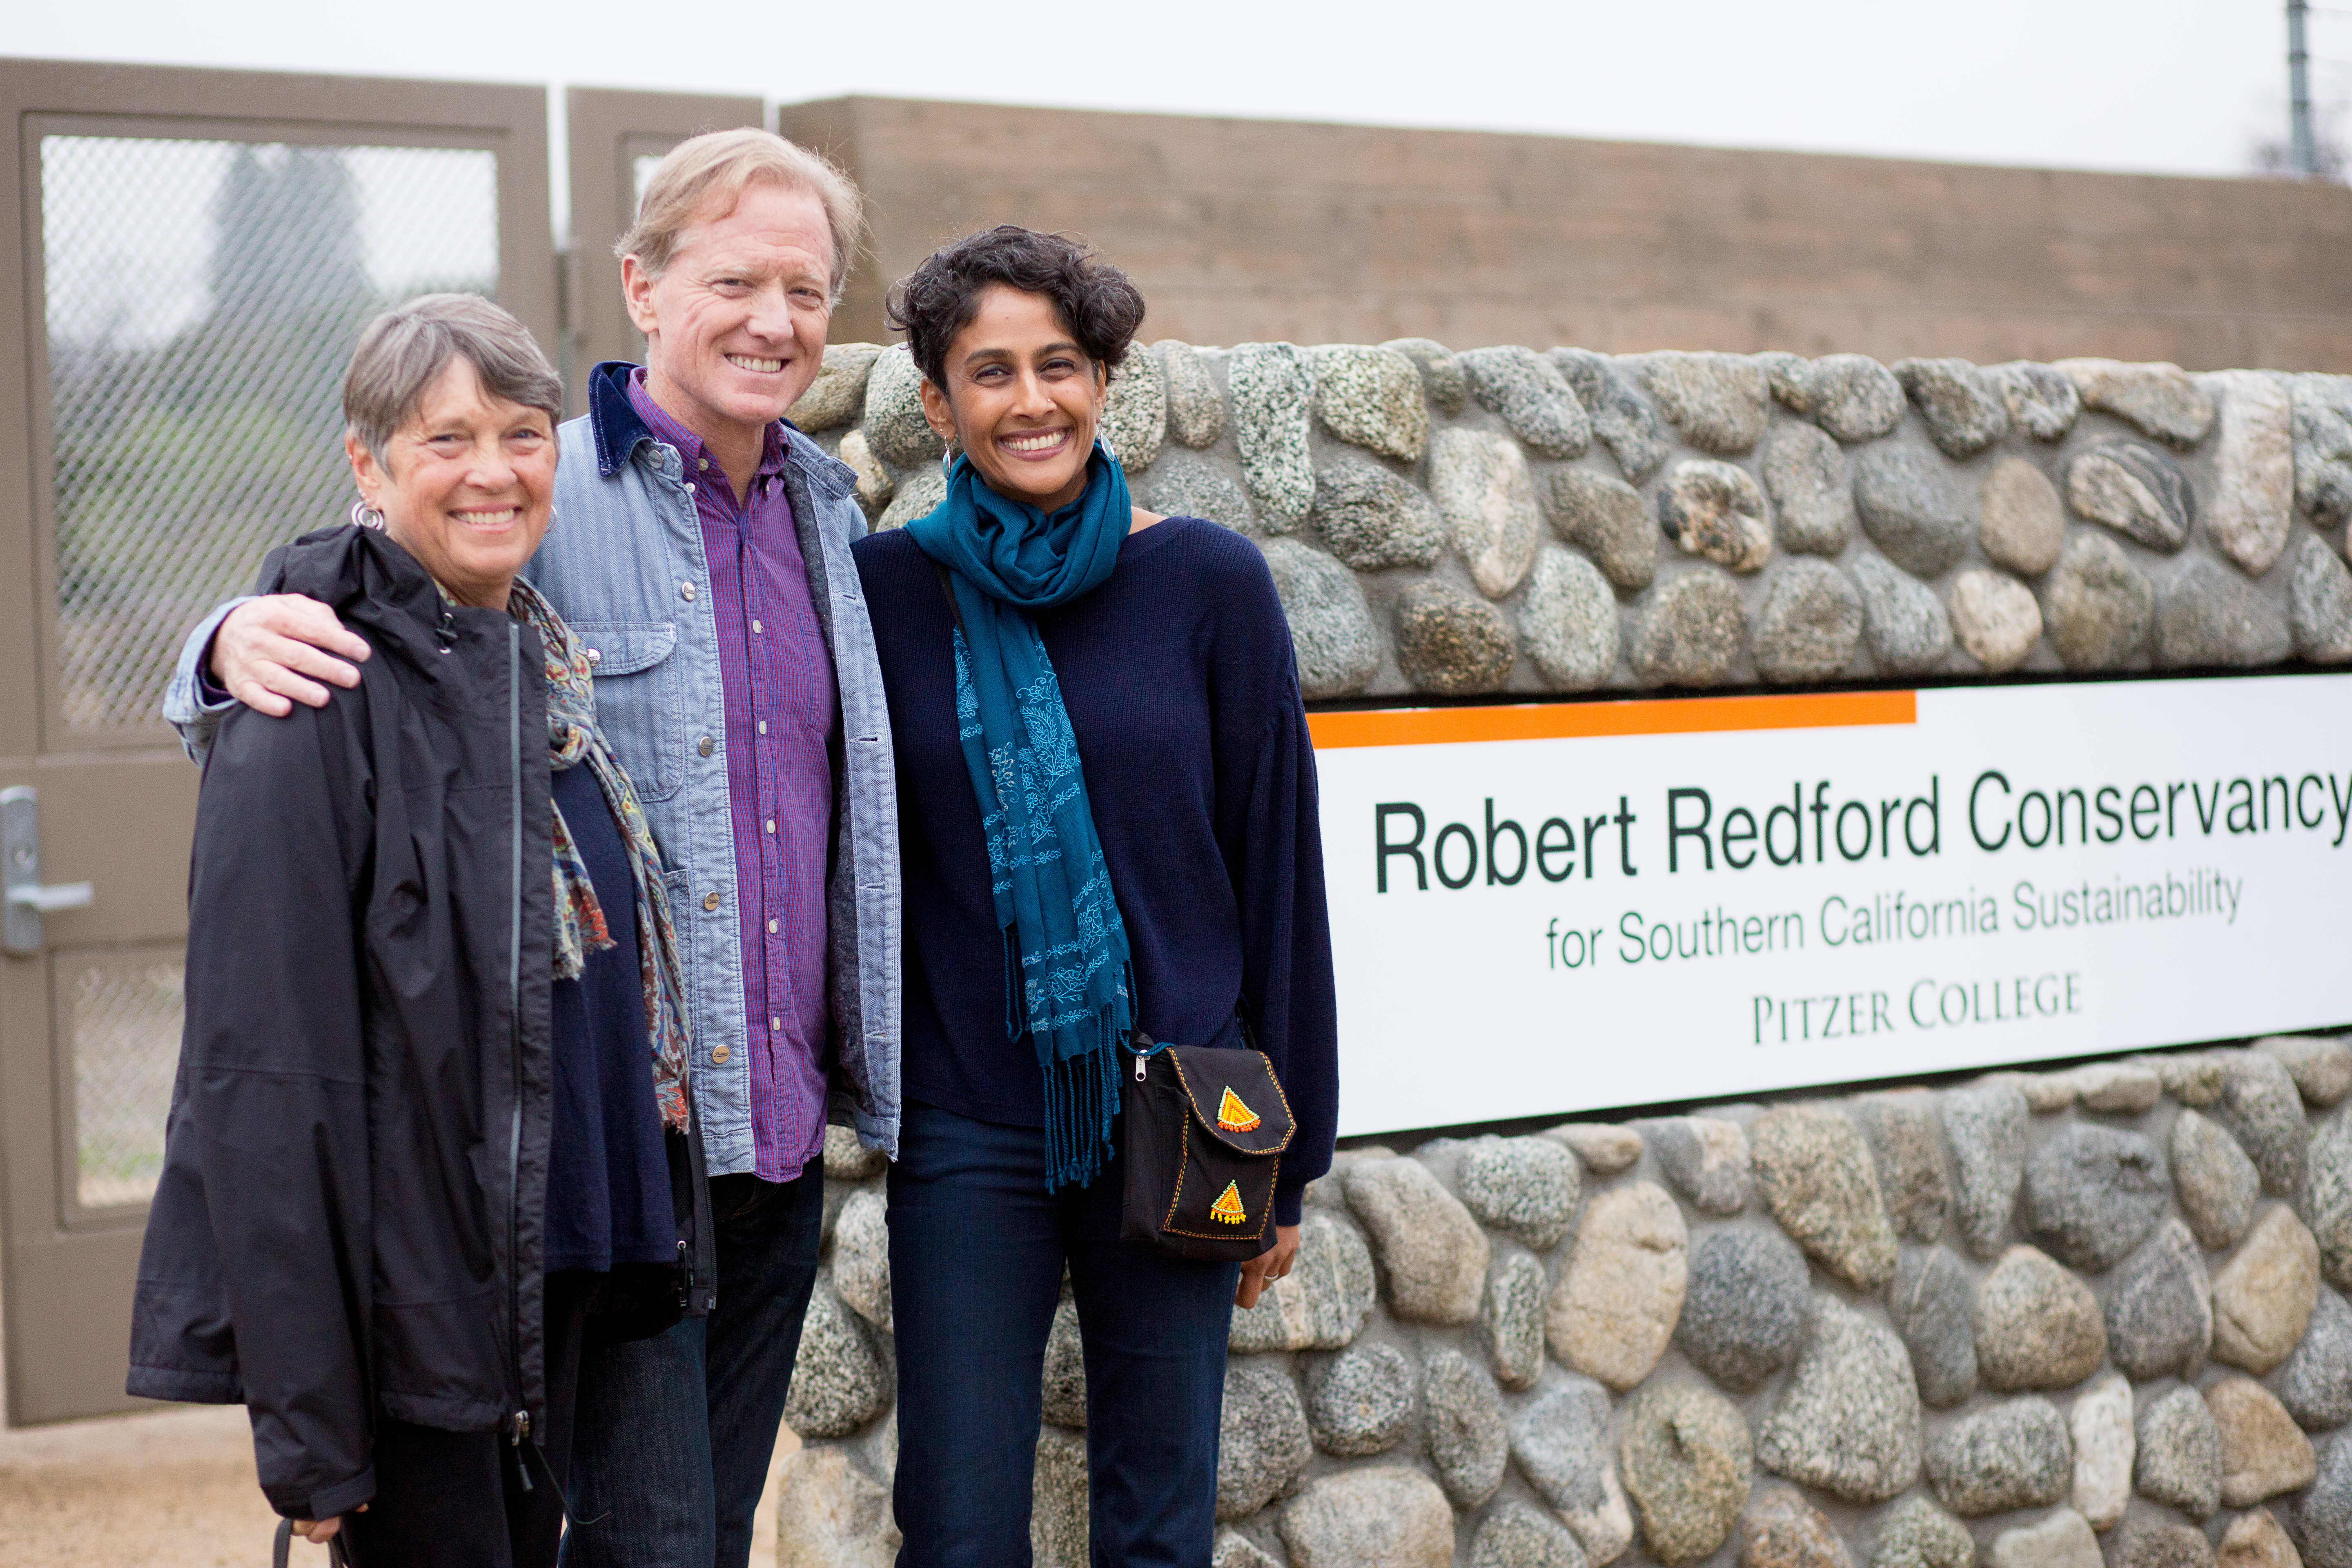 Trustee and donor Susan Pritzker, director and filmmaker James Redford and Conservancy Director Professor Brinda Sarathy by the Redford Conservancy sign on Foothill Boulevard in March 2018.